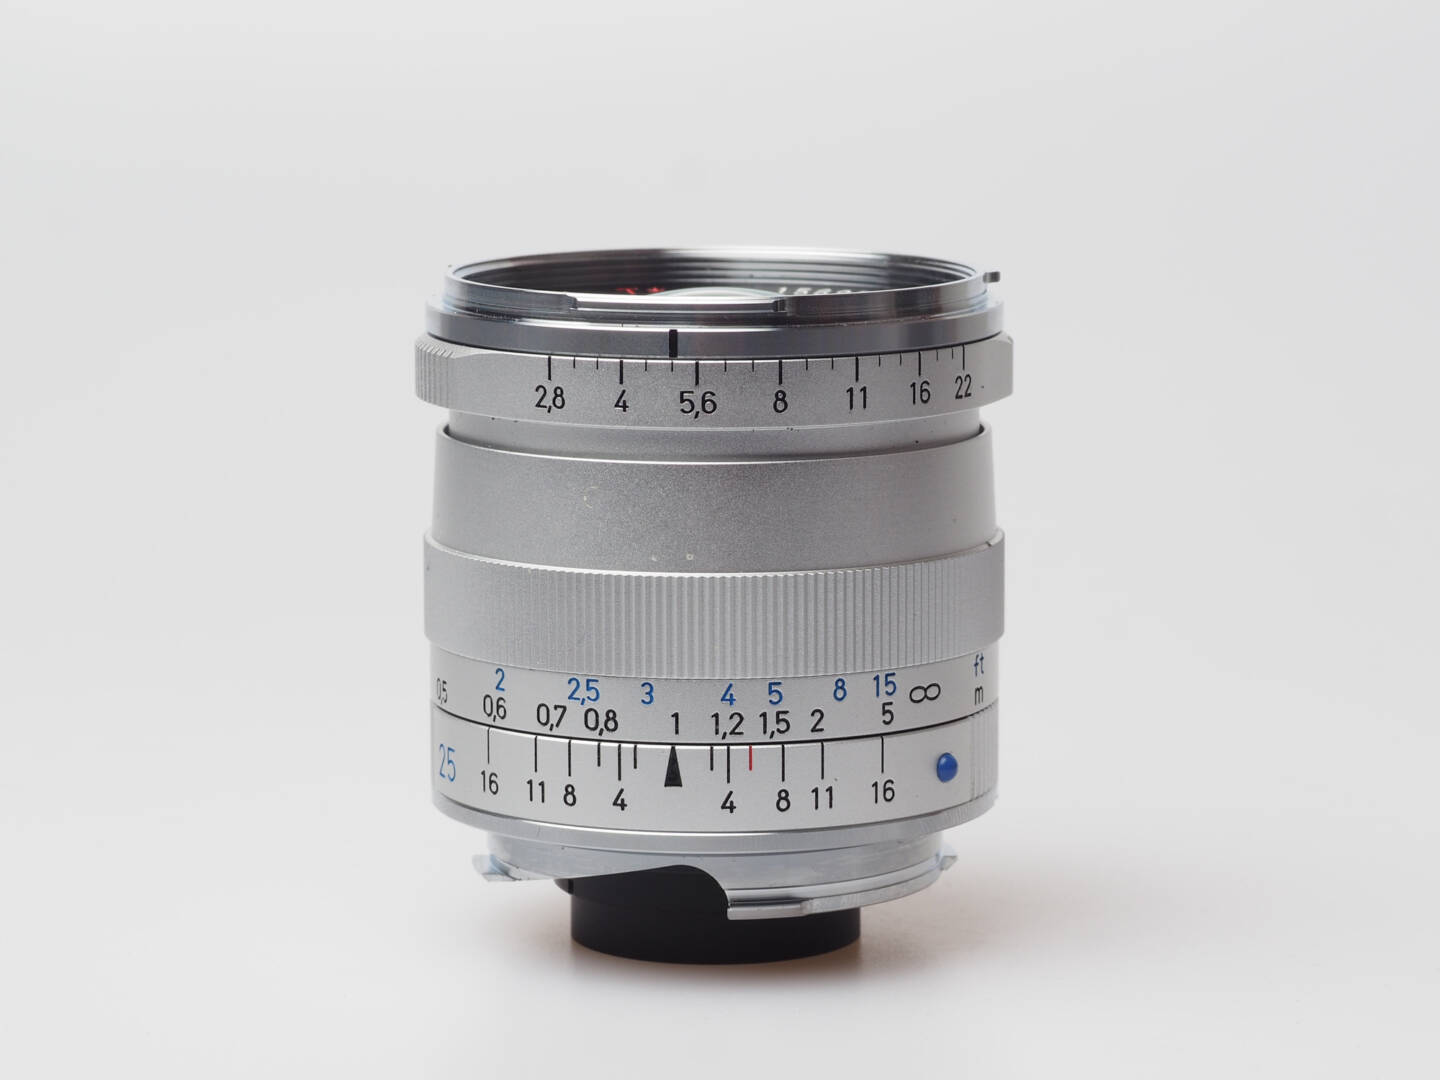 This is one of the highest-resolving lenses ever built if you believe what Zeiss says: Biogon ZM 25/2.8 T*